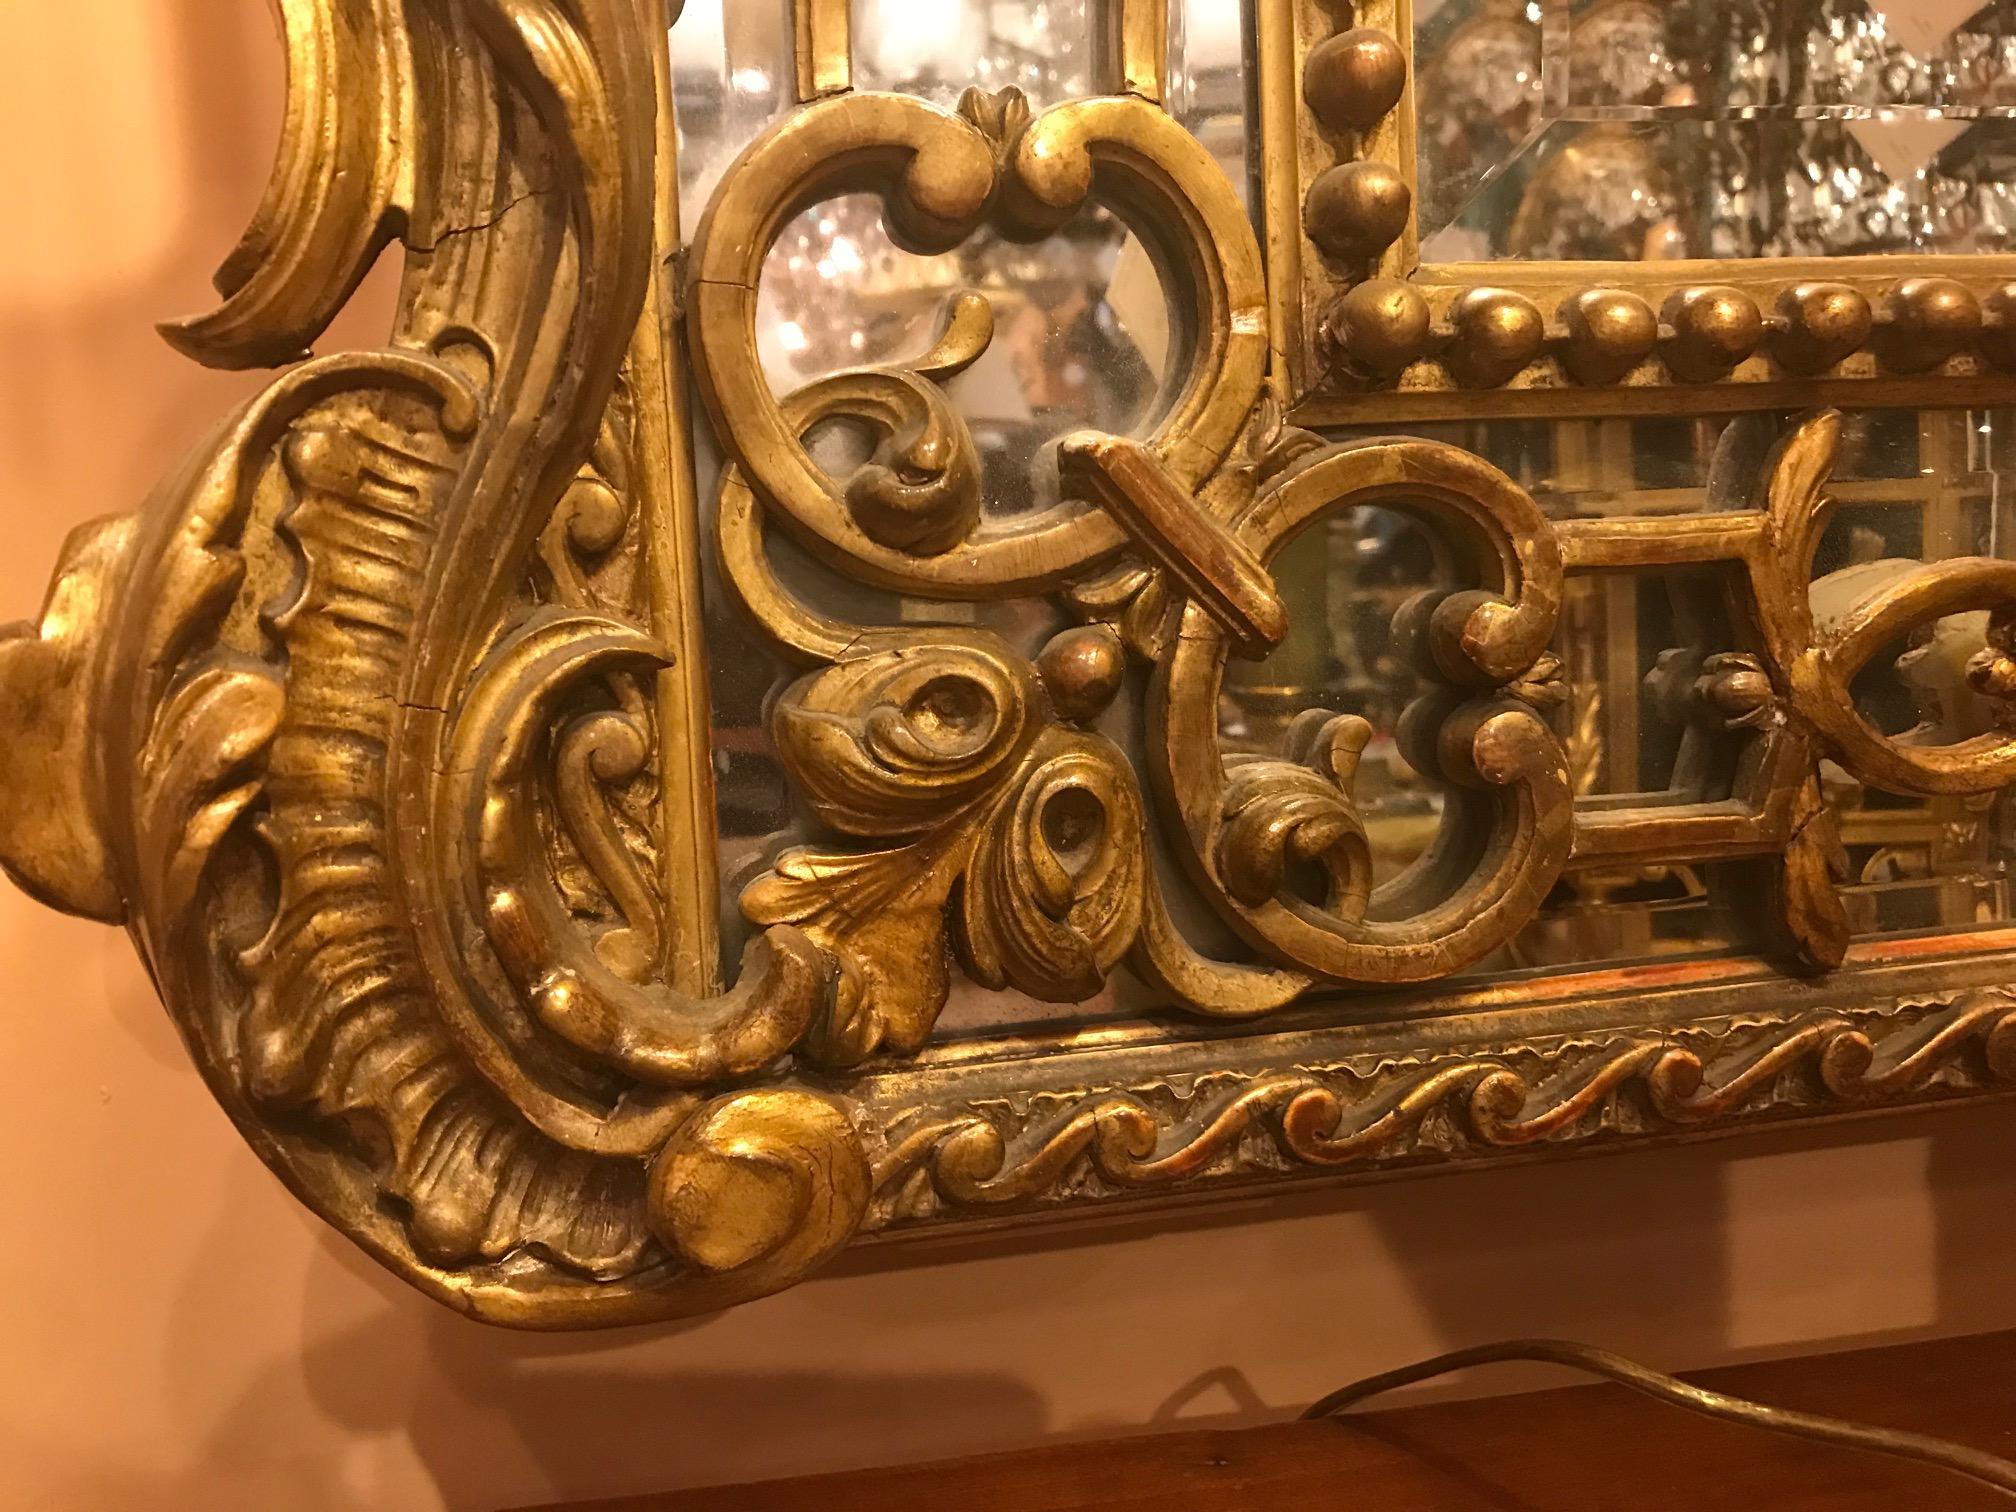 This highly decorative large mirror has a carved central crested pediment flanked by griffins. The open mirrored side panels, combined with the large central shaped plate give a great deal of reflective light. The slender panels of mirrored glass